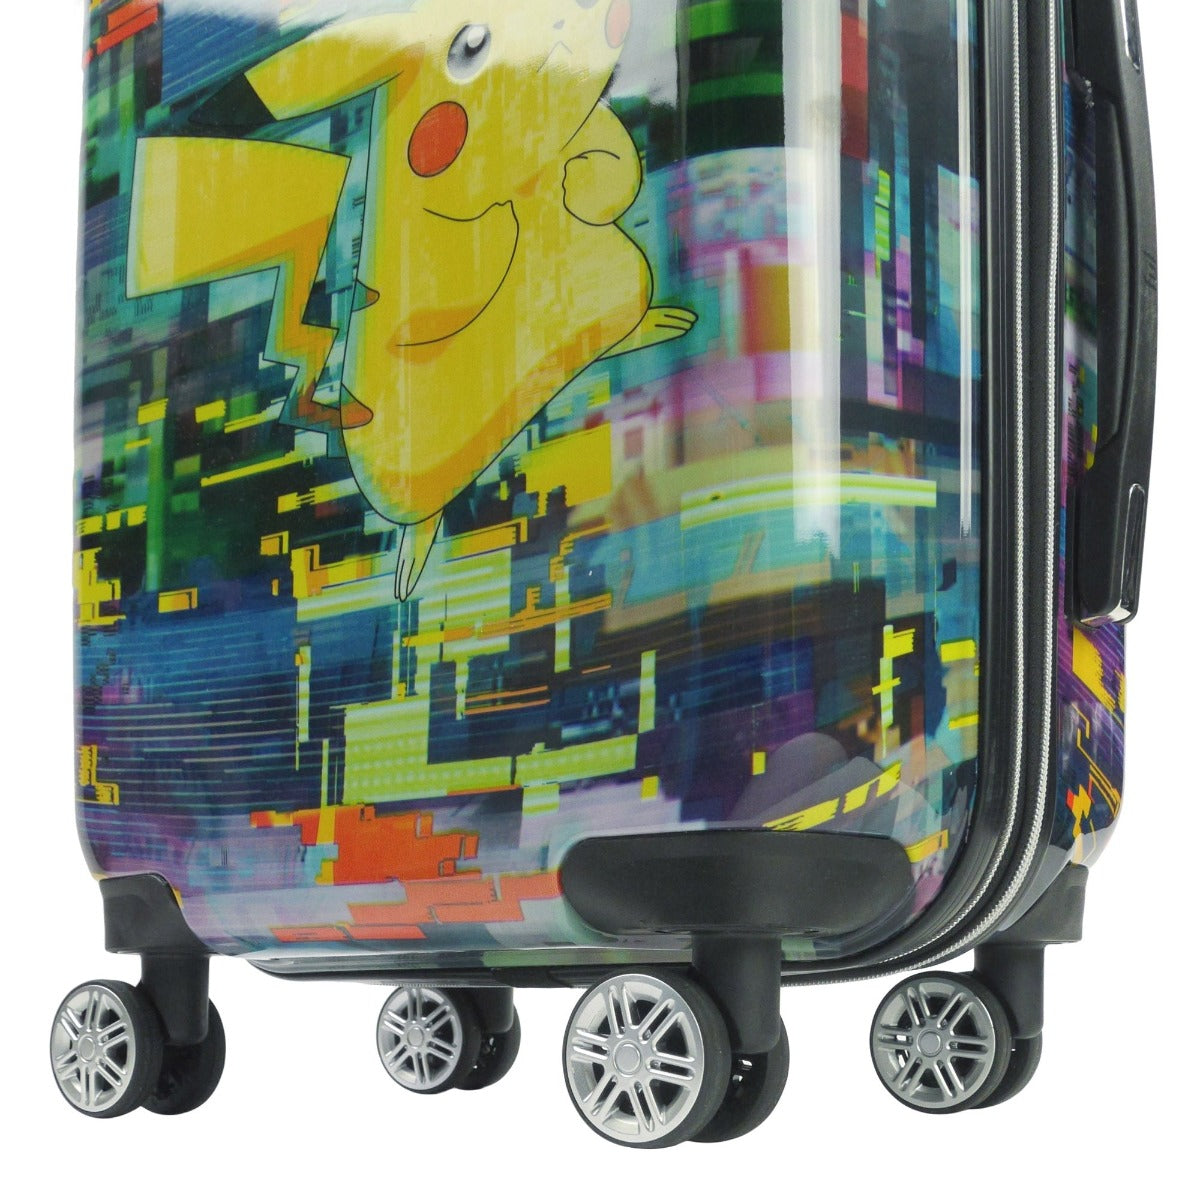 Pokemon Pikachu Luggage Cover Protective Suitcase CoverTravel The